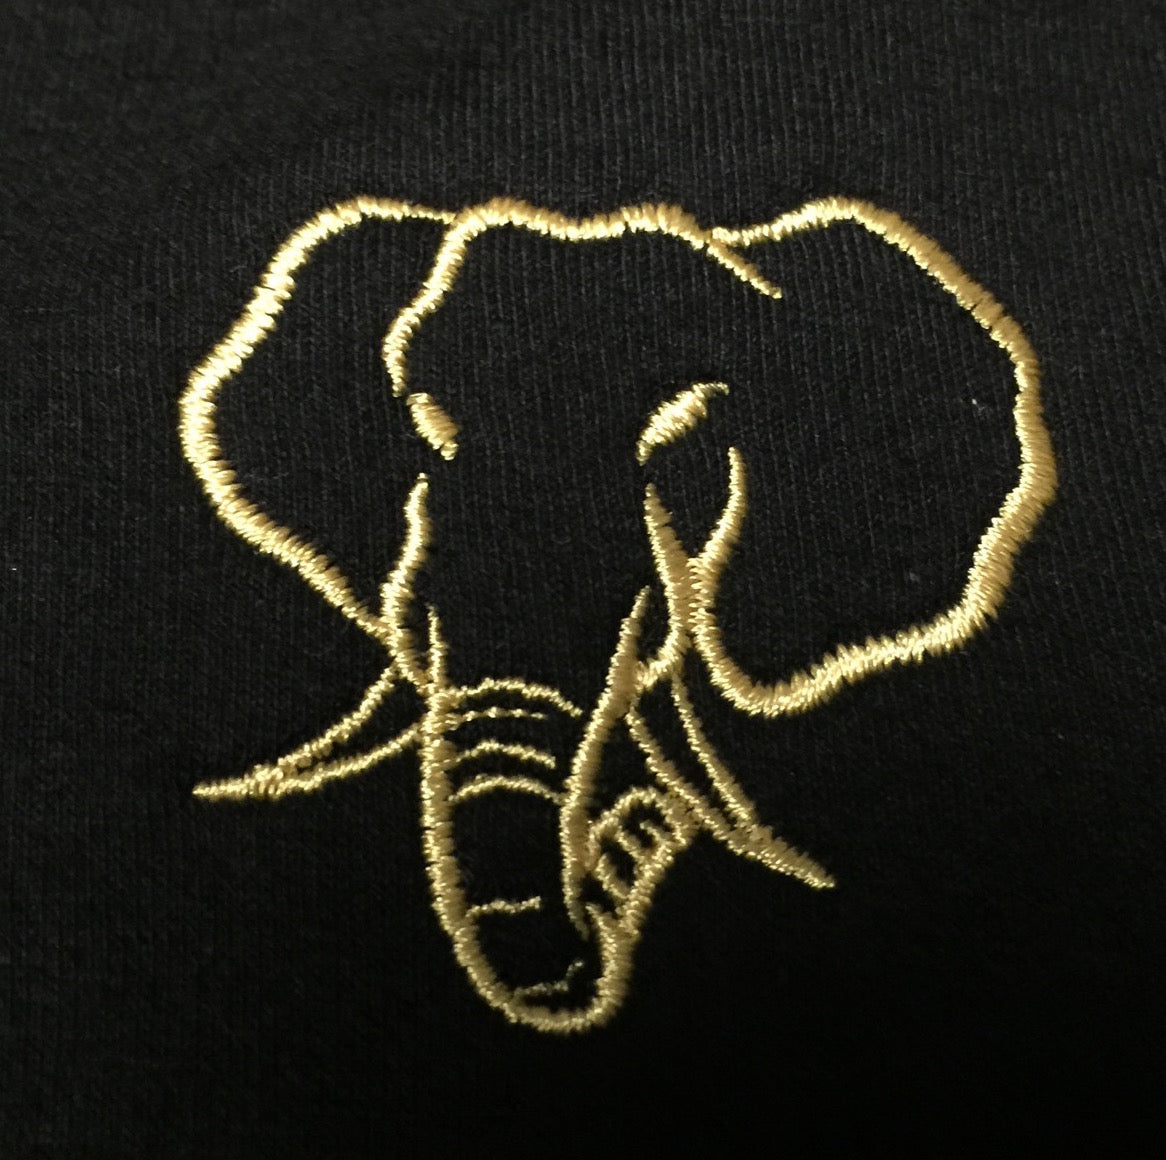 Elephant Head Crewneck Tee in Black with Gold Embroidery